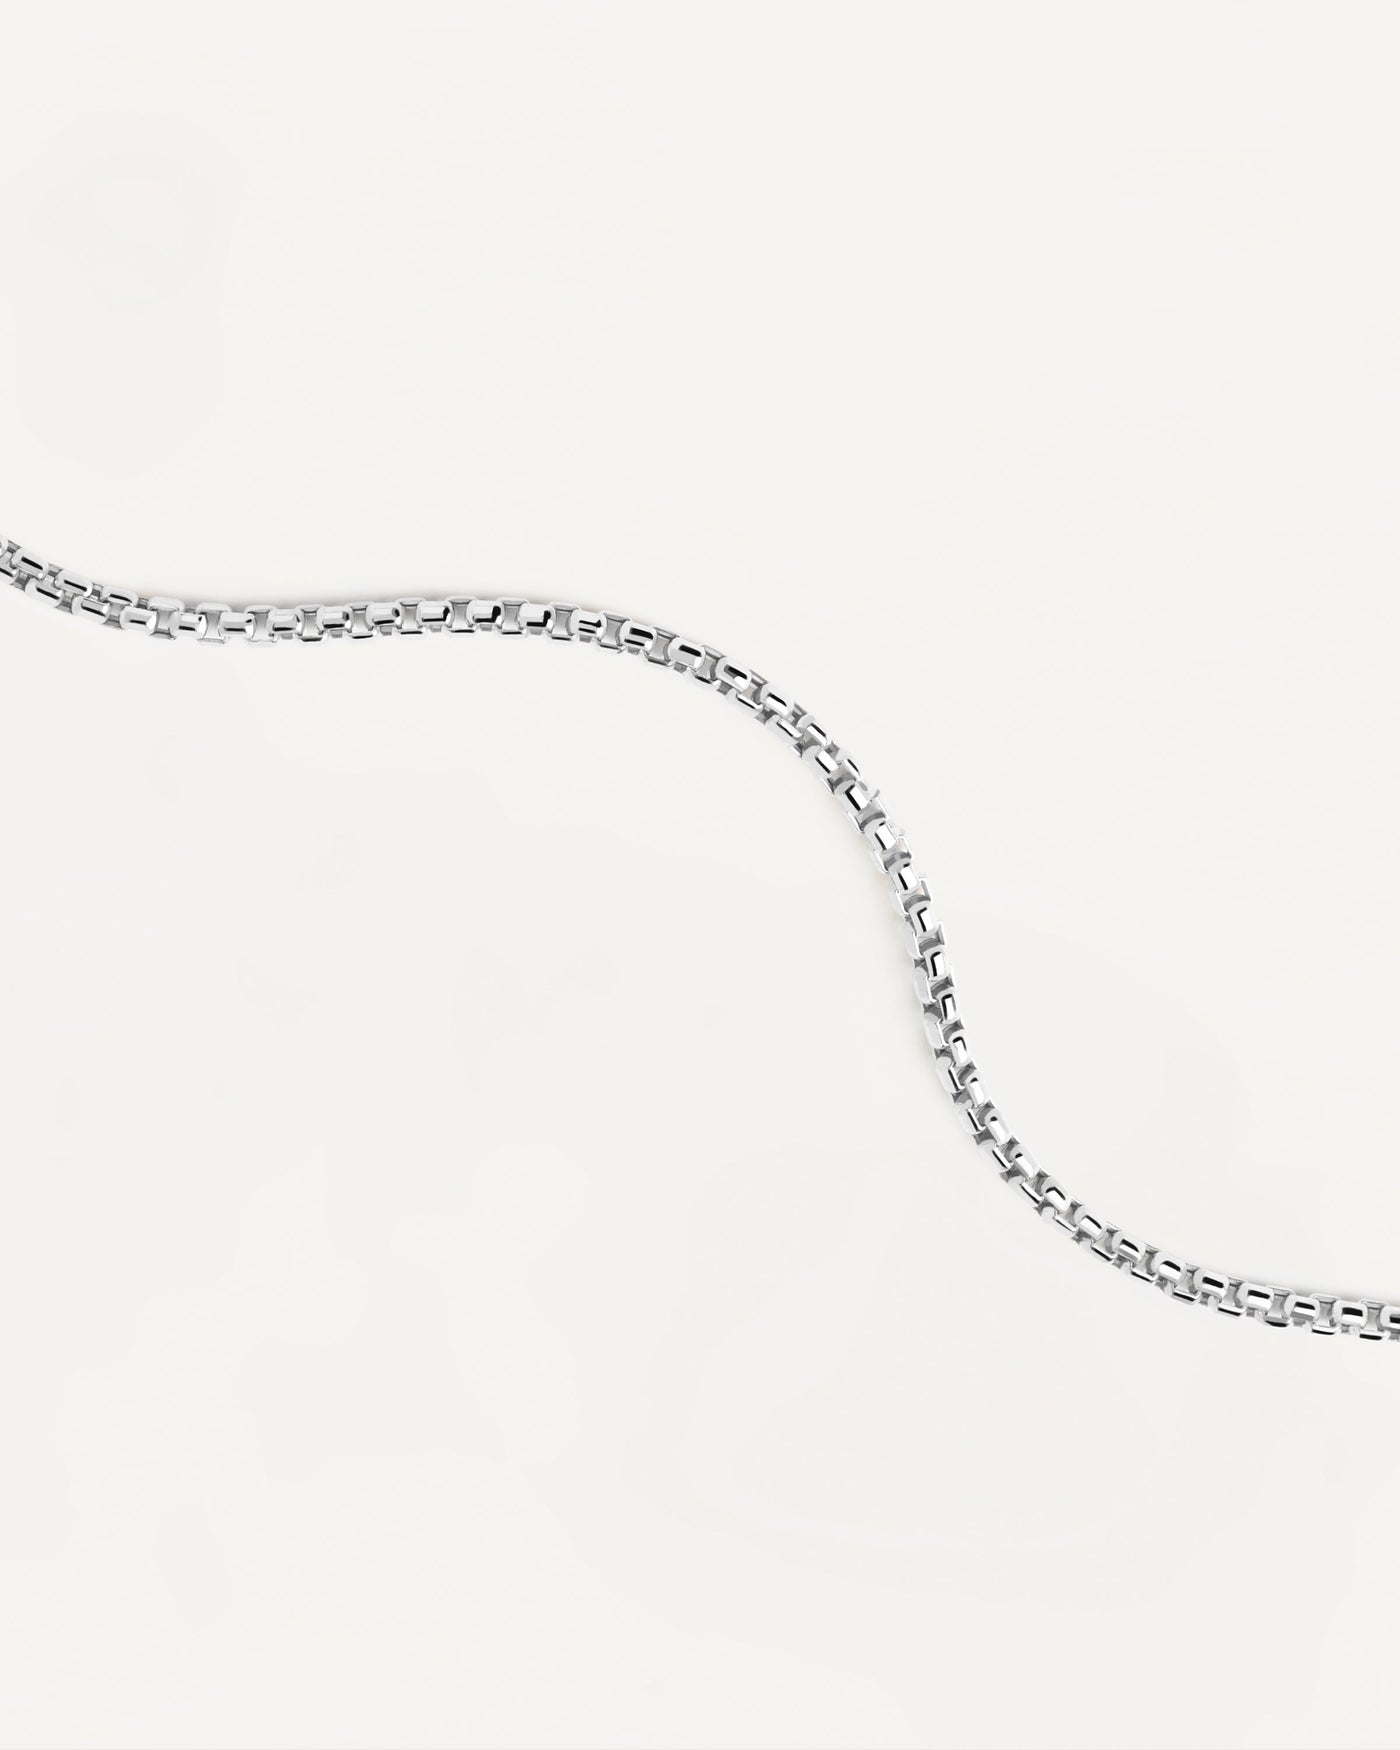 2023 Selection | White Gold Box Chain Necklace. 18K solid white gold chain necklace with box links. Get the latest arrival from PDPAOLA. Place your order safely and get this Best Seller. Free Shipping.